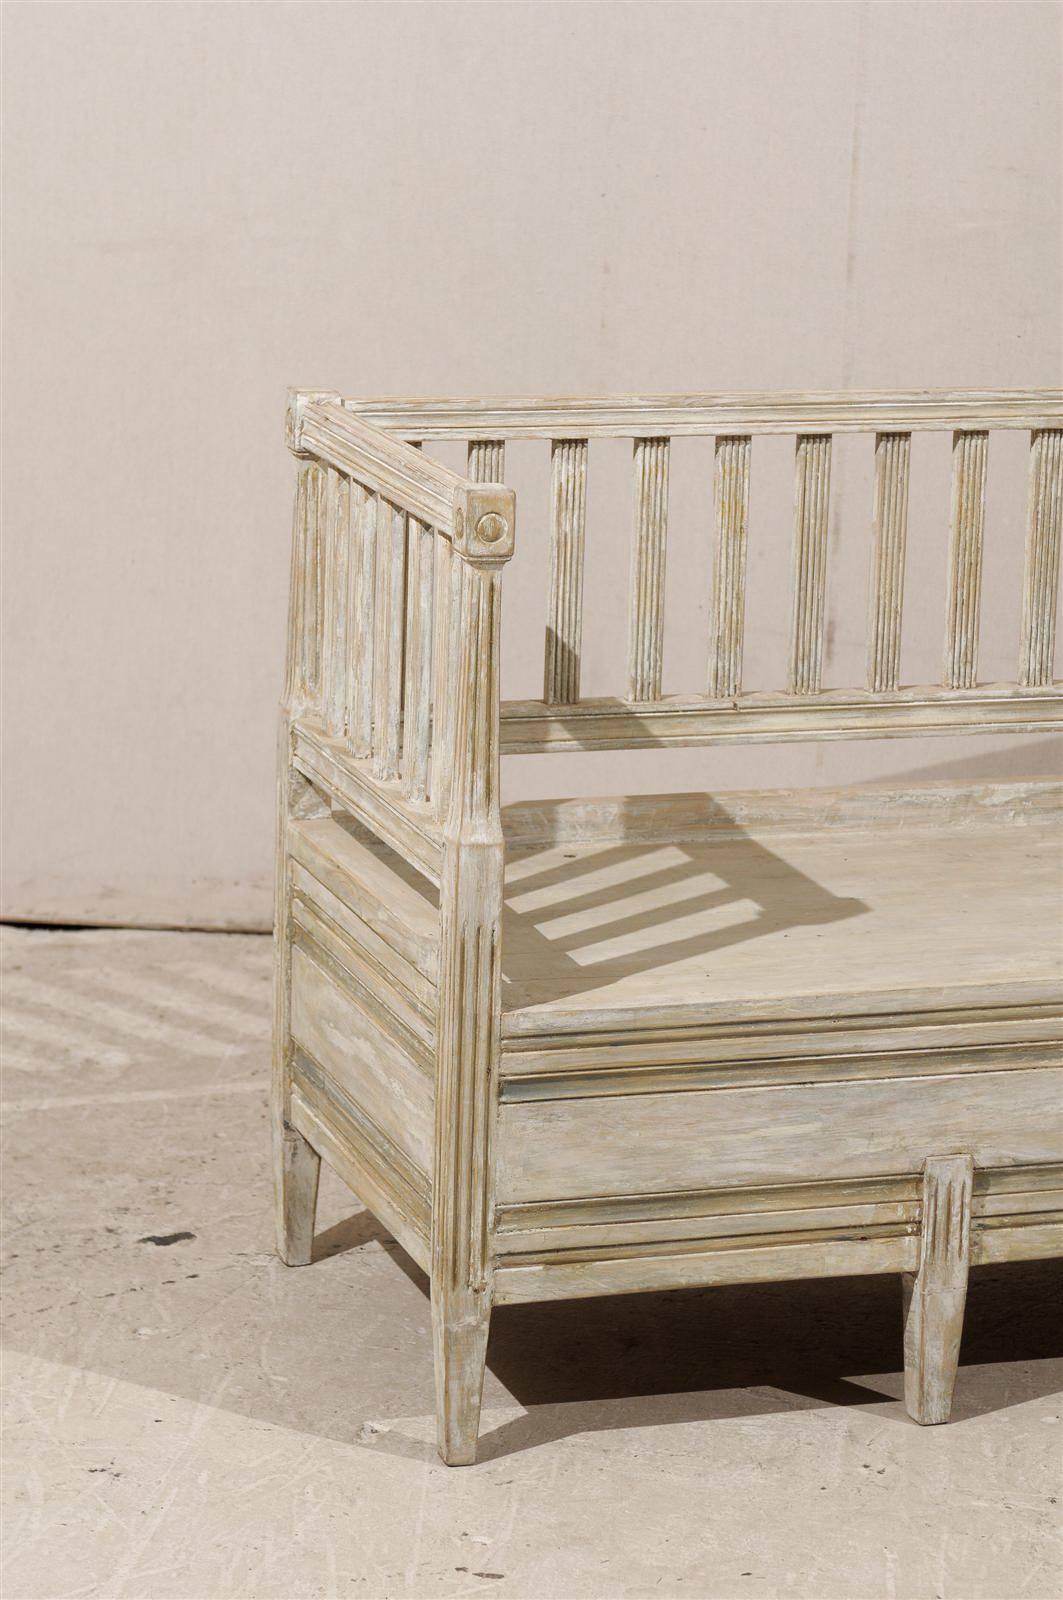 Carved A Swedish Late Gustavian Period Sofa Bench from the 19th Century with Back Slats